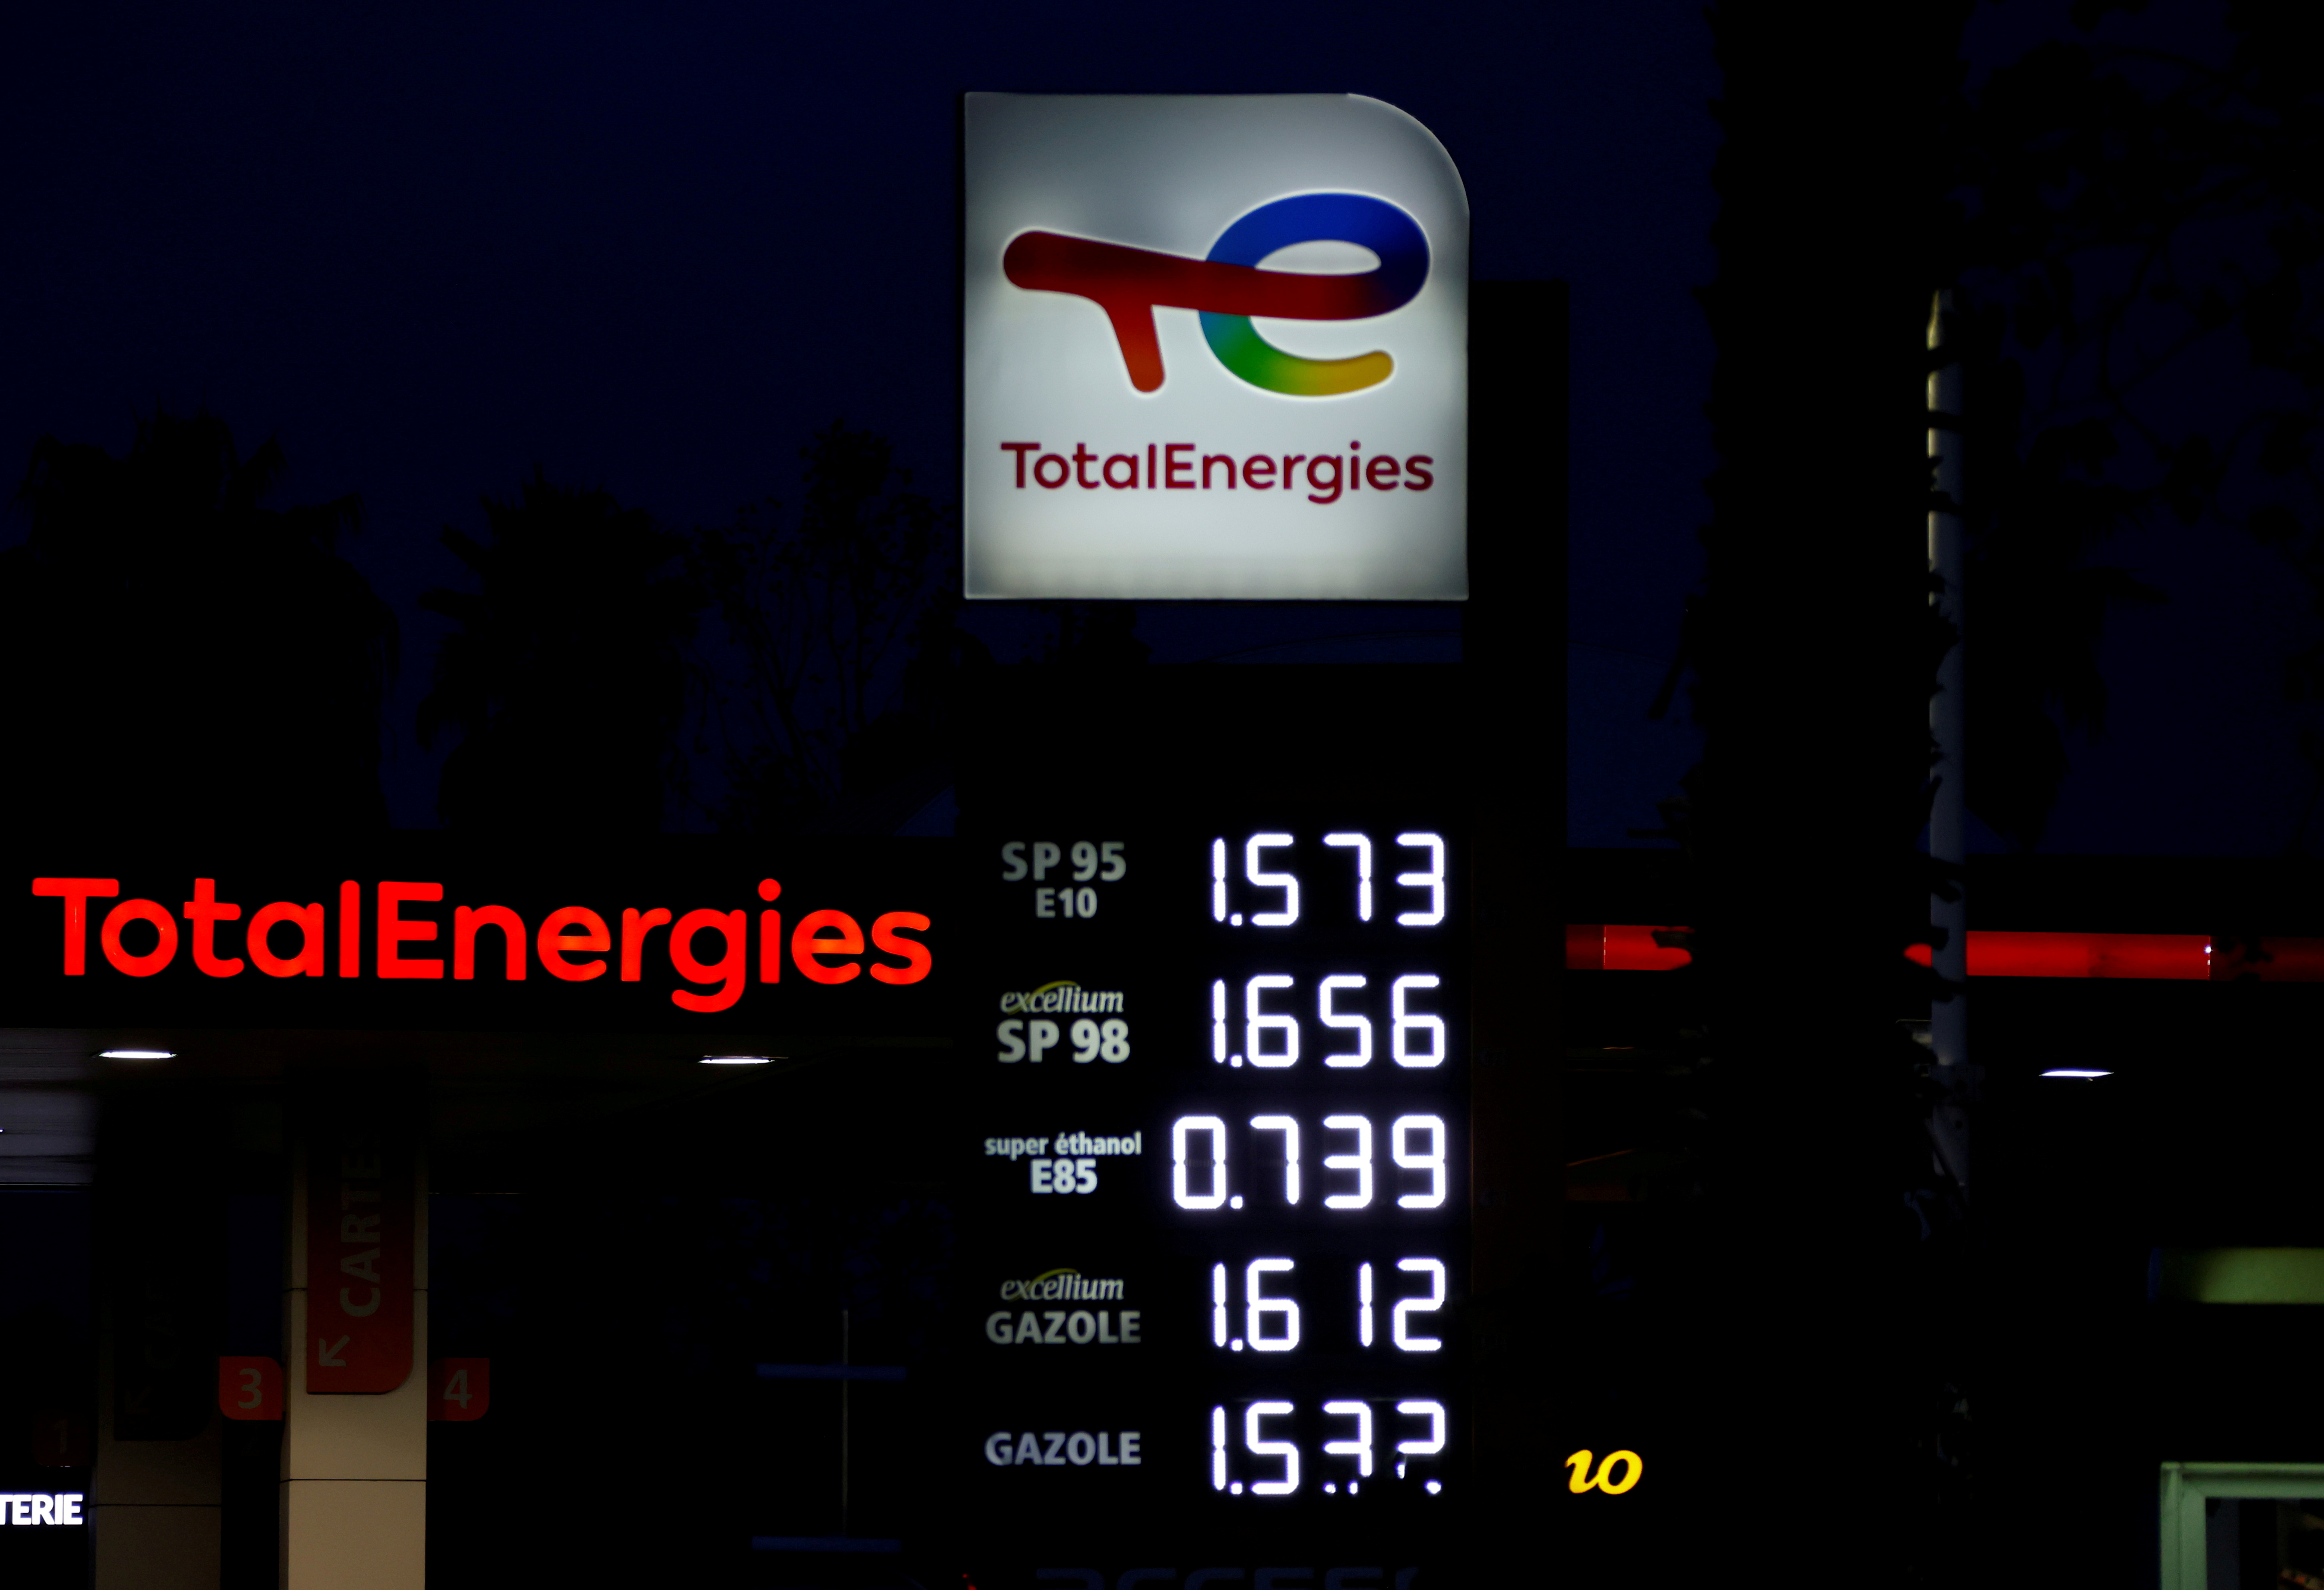 Fuel price signs are seen at a TotalEnergie petrol station in Nice, France, October 13, 2021. REUTERS/Eric Gaillard/File Photo